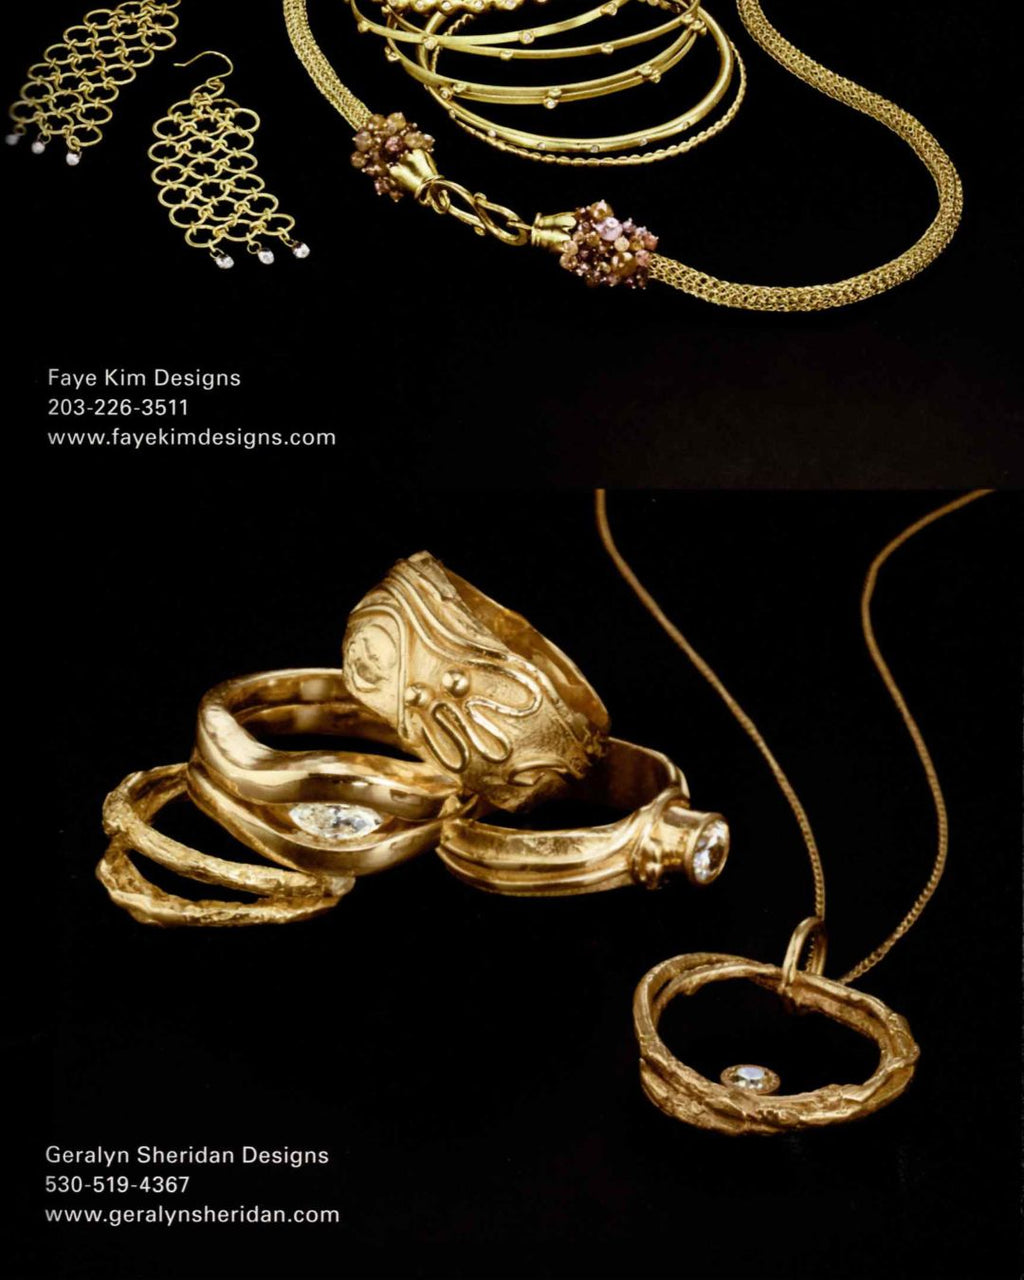 Geralyn Sheridan Designs Featuring Radiance of Gold 2012